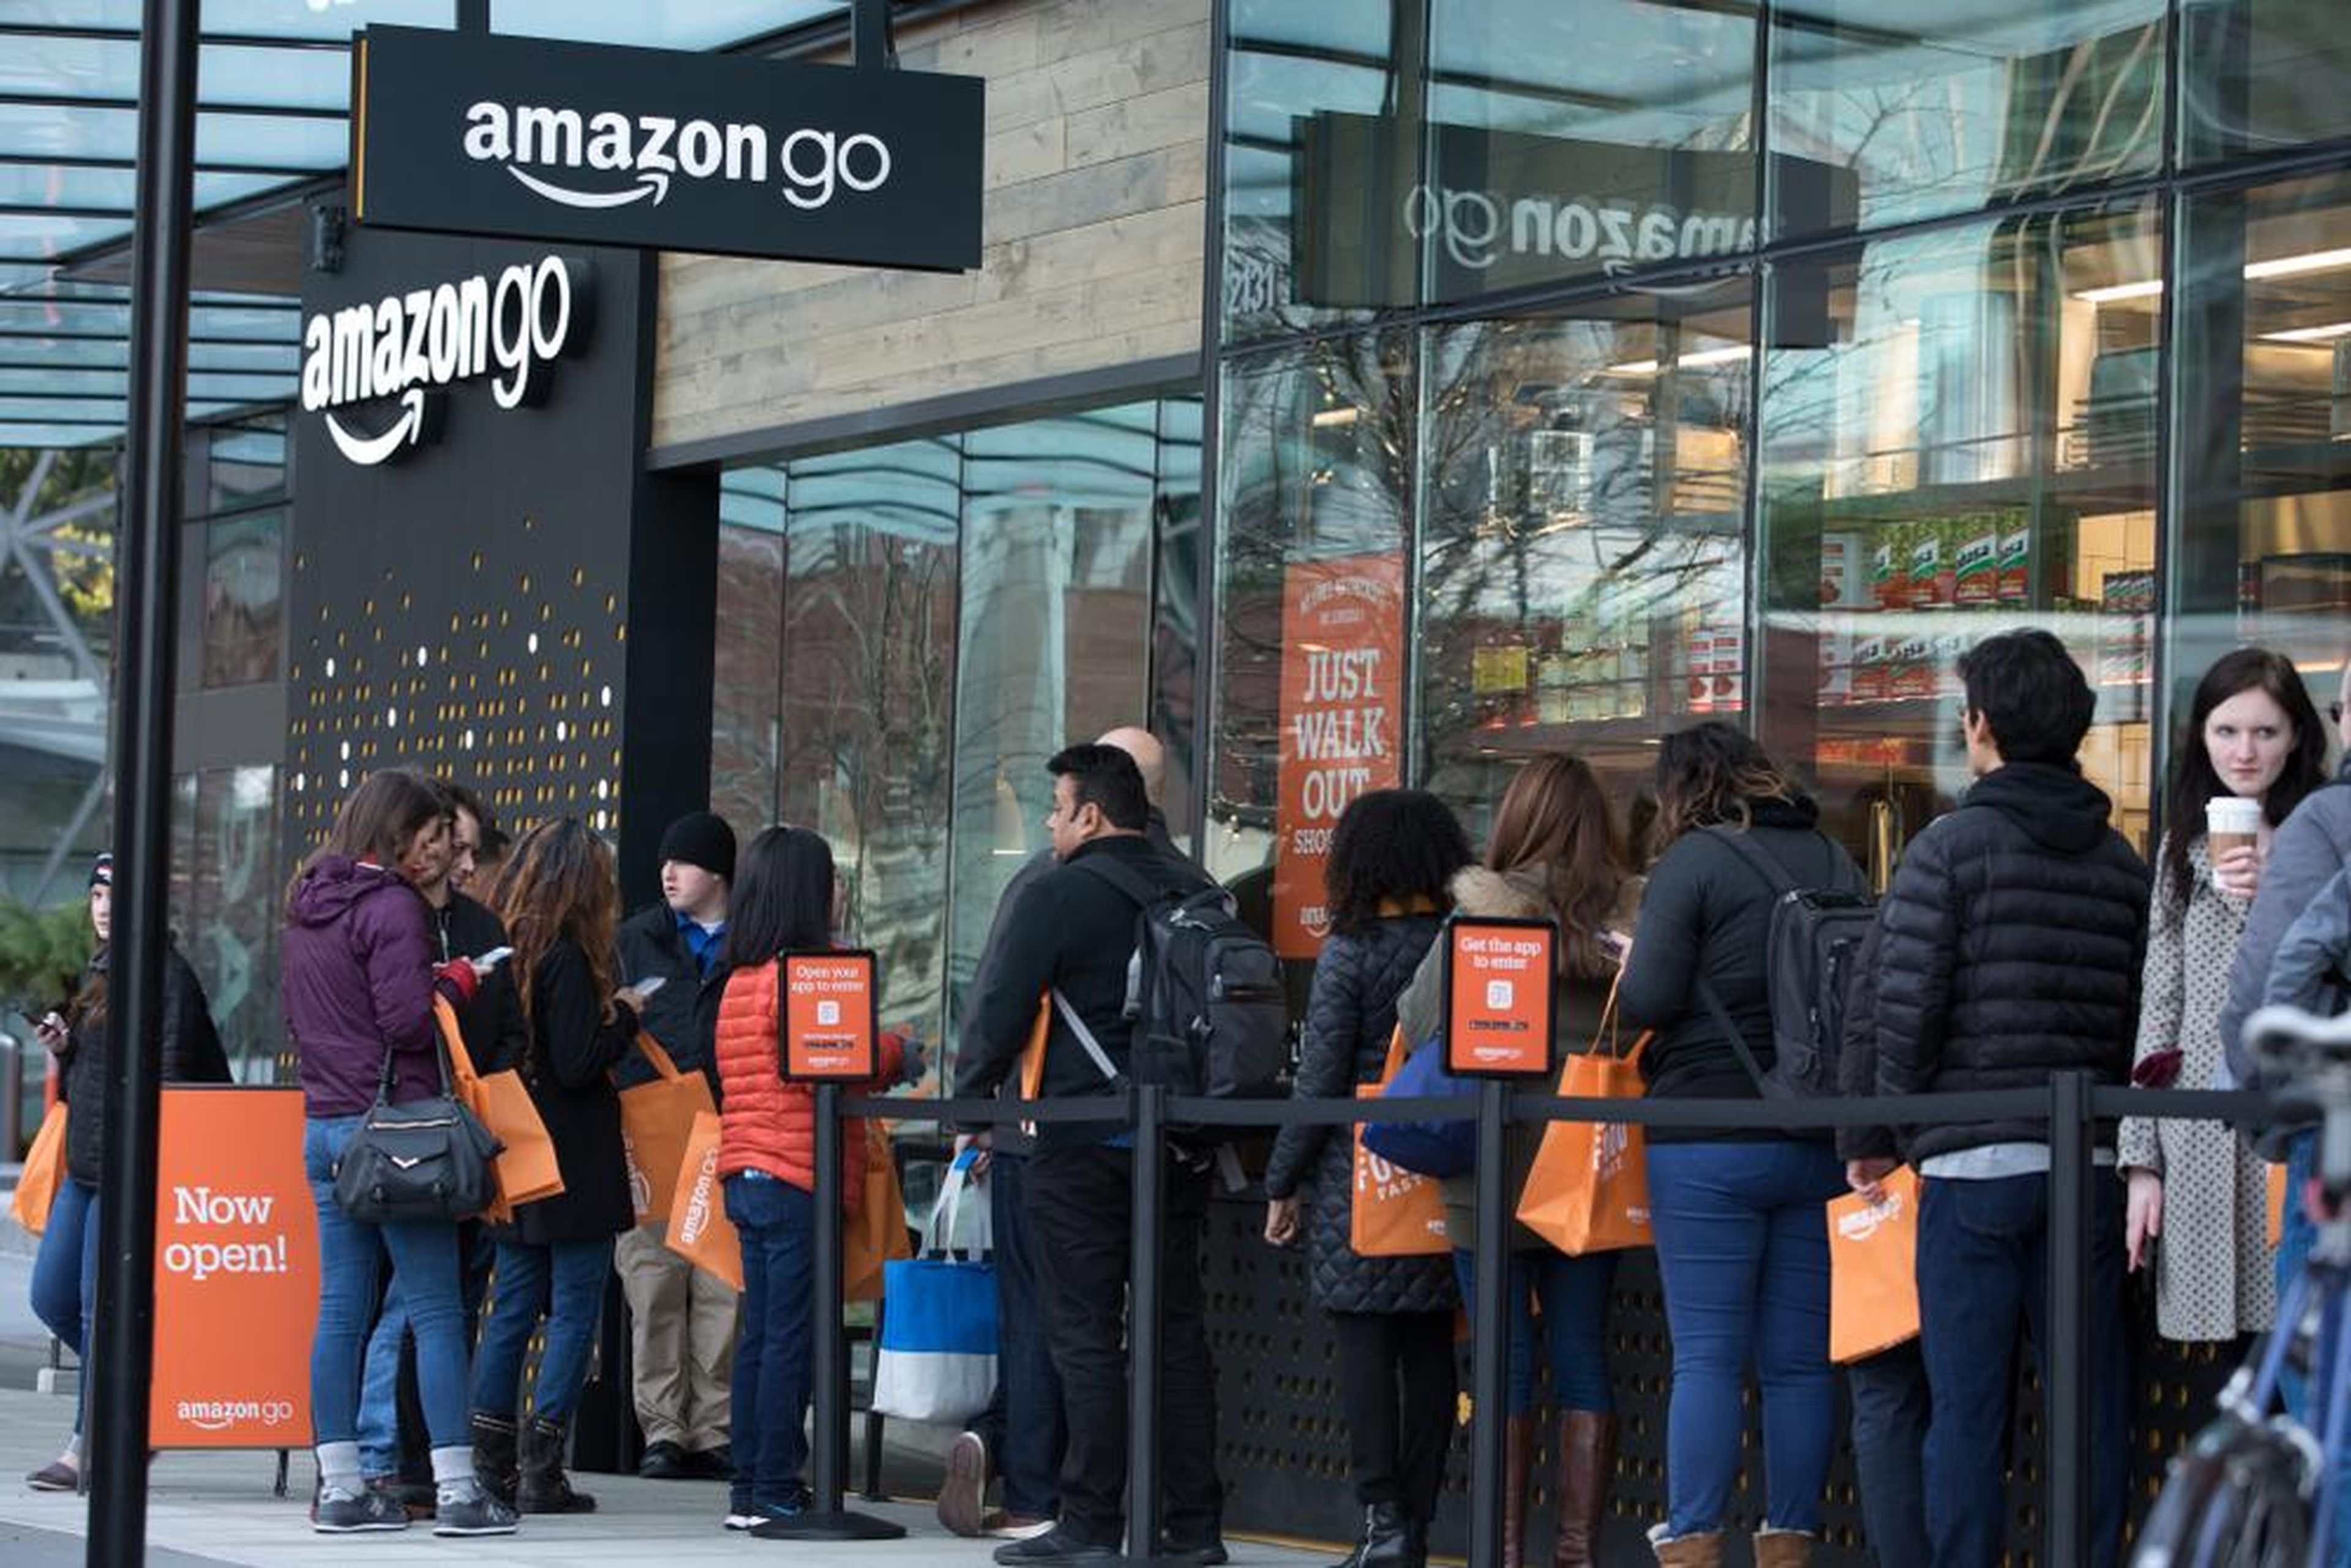 After just over a year of employees-only testing, Amazon finally opened its Amazon Go convenience store in Seattle in January. When it did, there were lines just to get in.